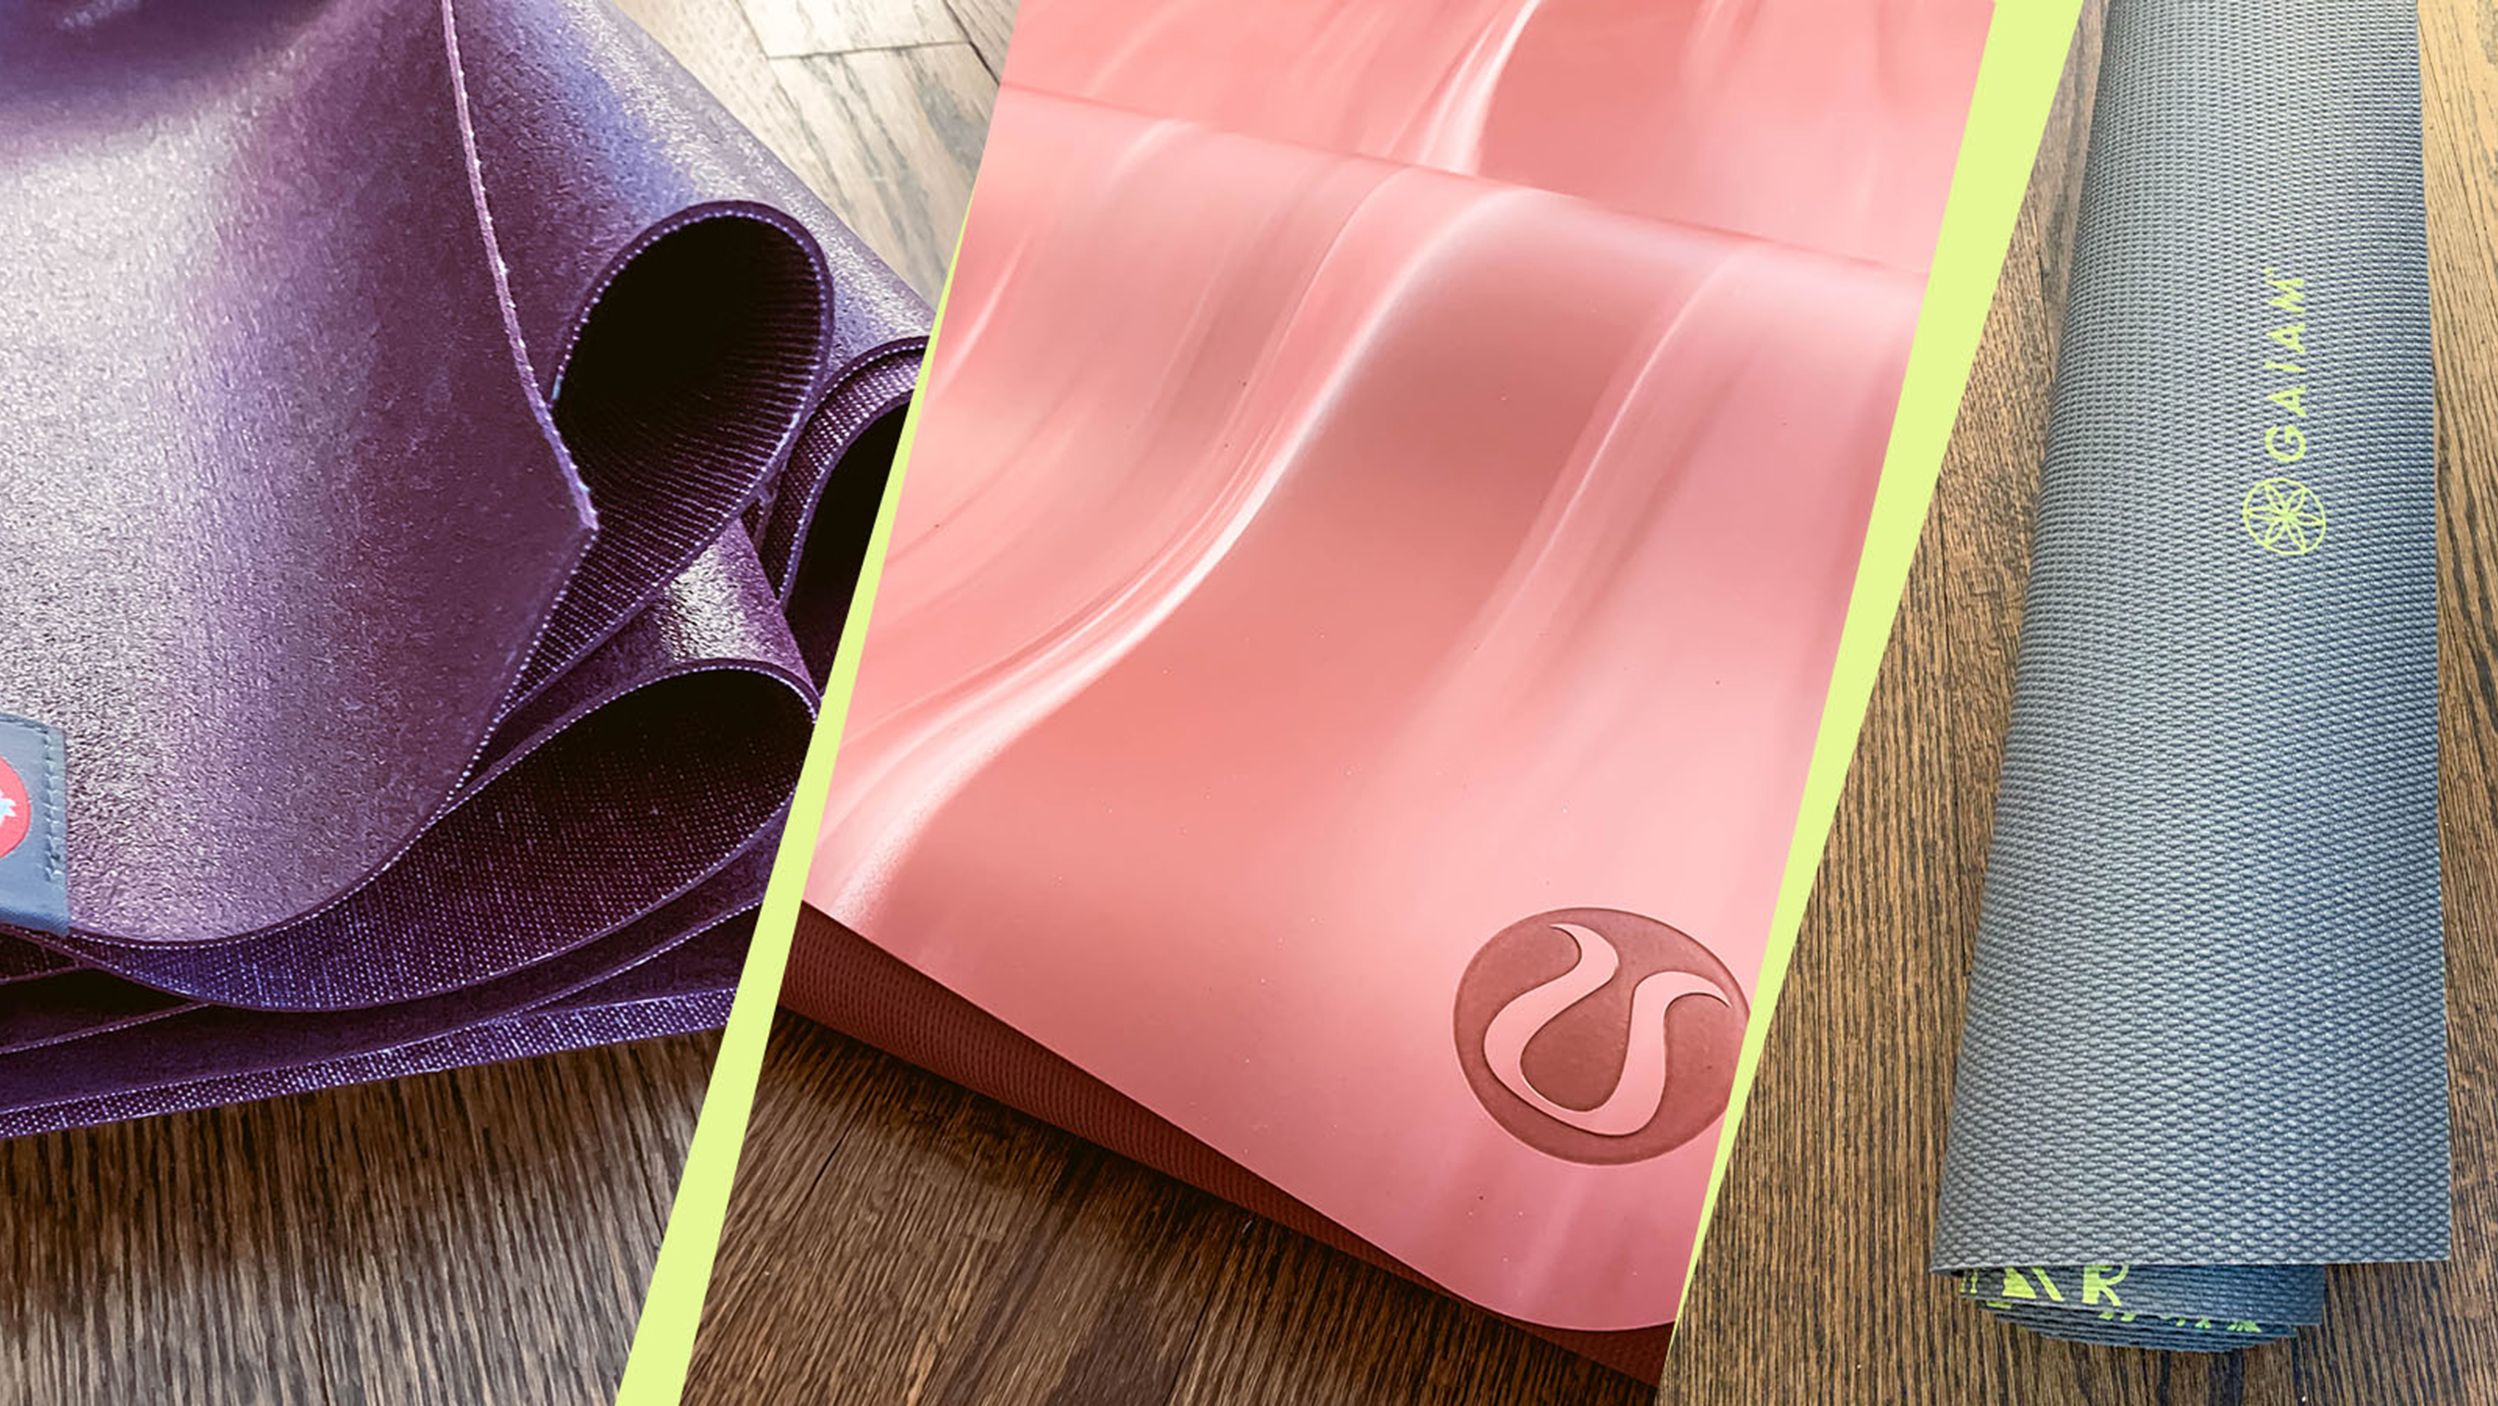 The smooth side of the yoga mat, up or down?